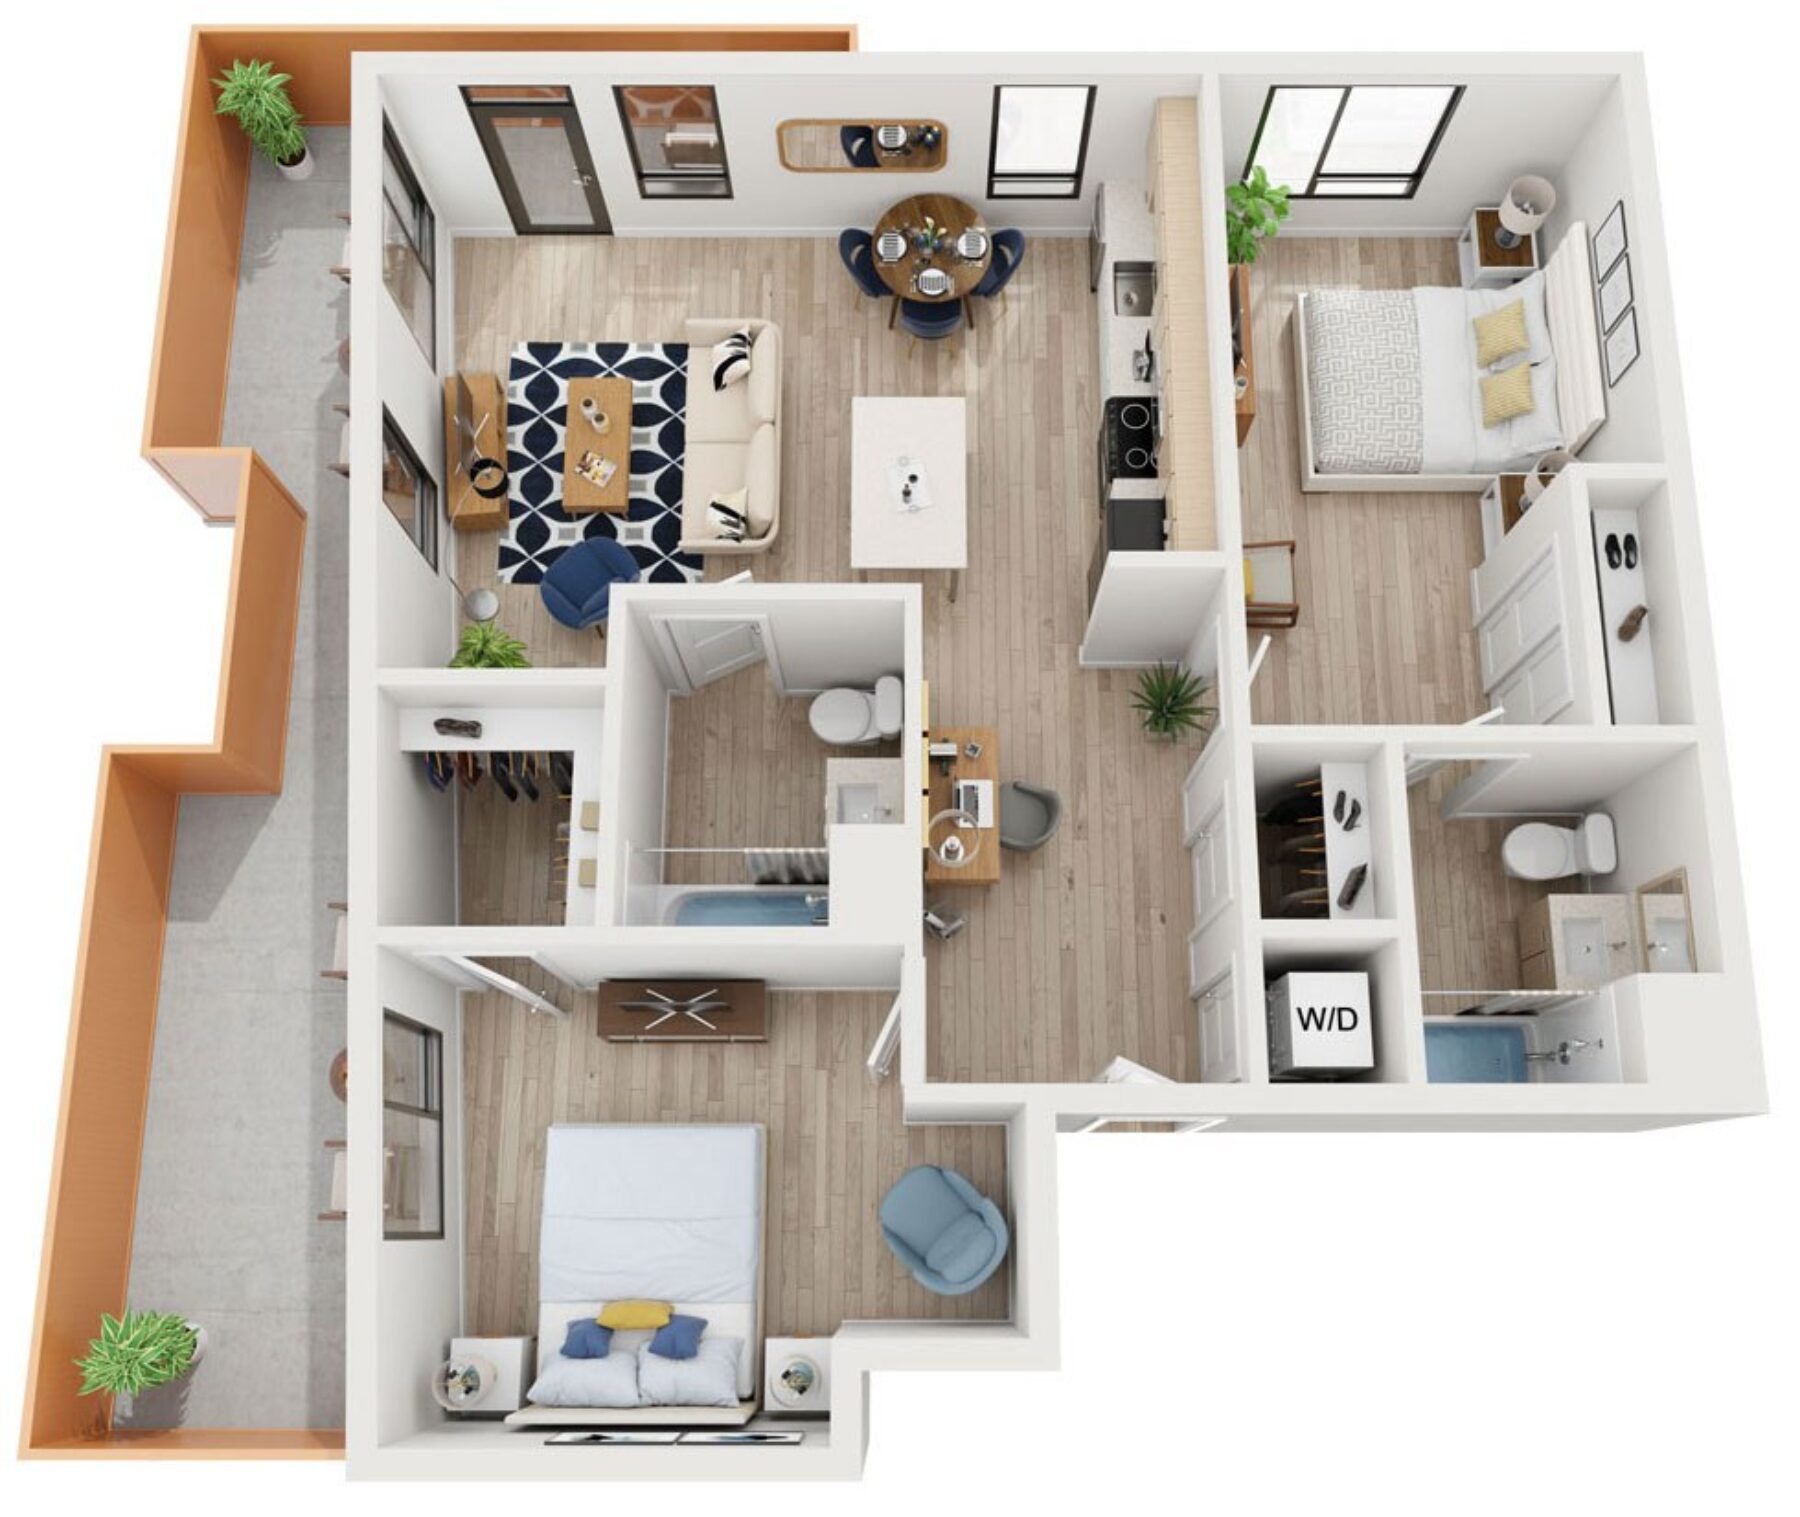 Plan Image: C7 - Two Bedroom